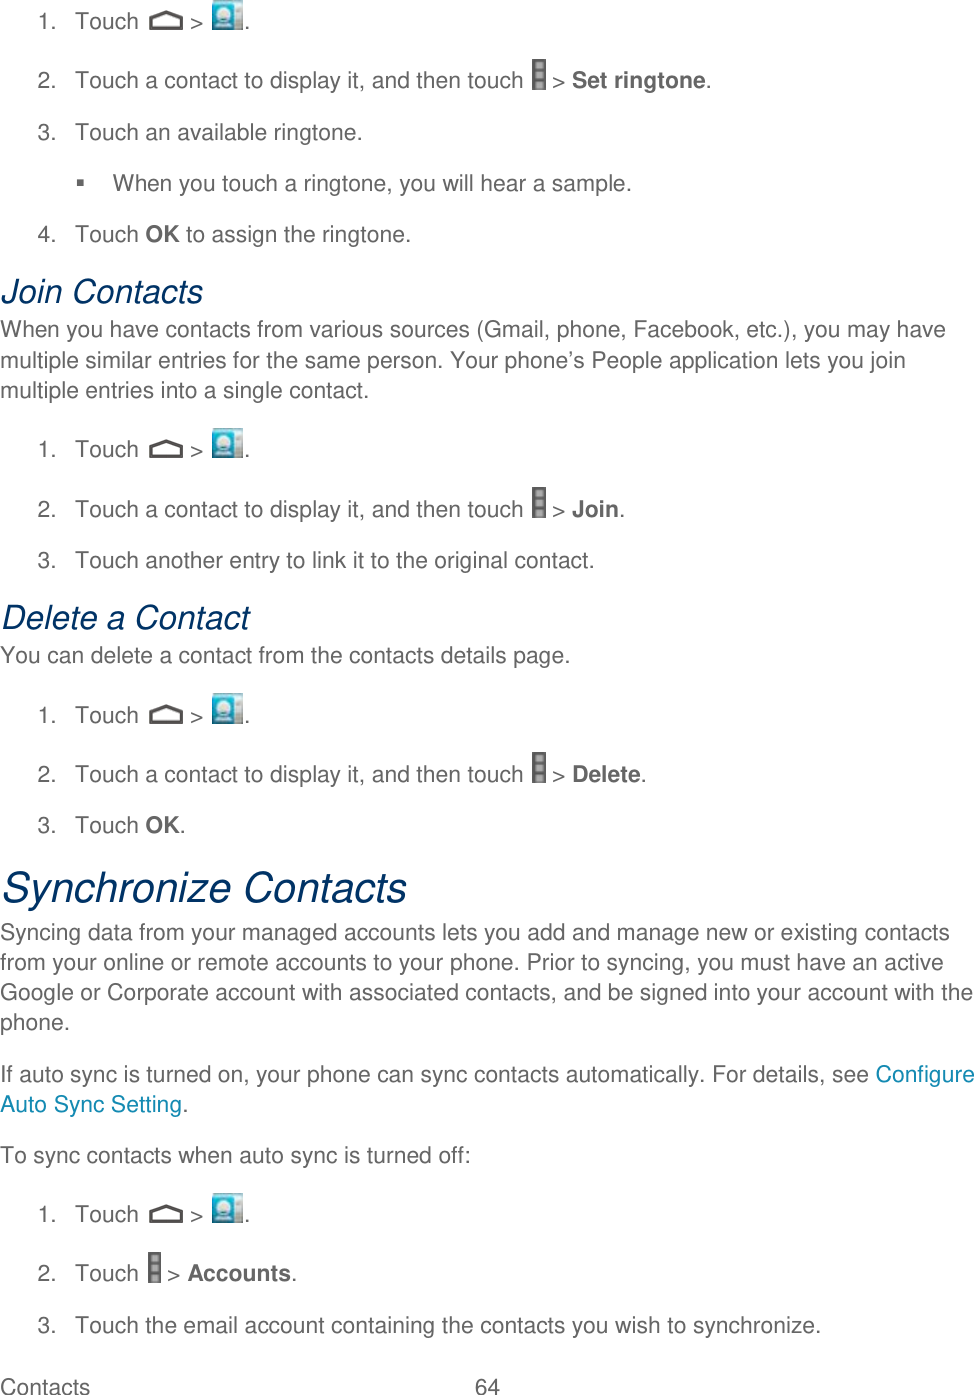 Contacts  64   1.  Touch   &gt;  . 2.  Touch a contact to display it, and then touch   &gt; Set ringtone. 3.  Touch an available ringtone.   When you touch a ringtone, you will hear a sample. 4.  Touch OK to assign the ringtone. Join Contacts When you have contacts from various sources (Gmail, phone, Facebook, etc.), you may have multiple similar entries for the same person. Your phone’s People application lets you join multiple entries into a single contact. 1.  Touch   &gt;  . 2.  Touch a contact to display it, and then touch   &gt; Join. 3.  Touch another entry to link it to the original contact. Delete a Contact You can delete a contact from the contacts details page. 1.  Touch   &gt;  . 2.  Touch a contact to display it, and then touch   &gt; Delete. 3.  Touch OK. Synchronize Contacts Syncing data from your managed accounts lets you add and manage new or existing contacts from your online or remote accounts to your phone. Prior to syncing, you must have an active Google or Corporate account with associated contacts, and be signed into your account with the phone. If auto sync is turned on, your phone can sync contacts automatically. For details, see Configure Auto Sync Setting. To sync contacts when auto sync is turned off: 1.  Touch   &gt;  . 2.  Touch   &gt; Accounts. 3.  Touch the email account containing the contacts you wish to synchronize. 